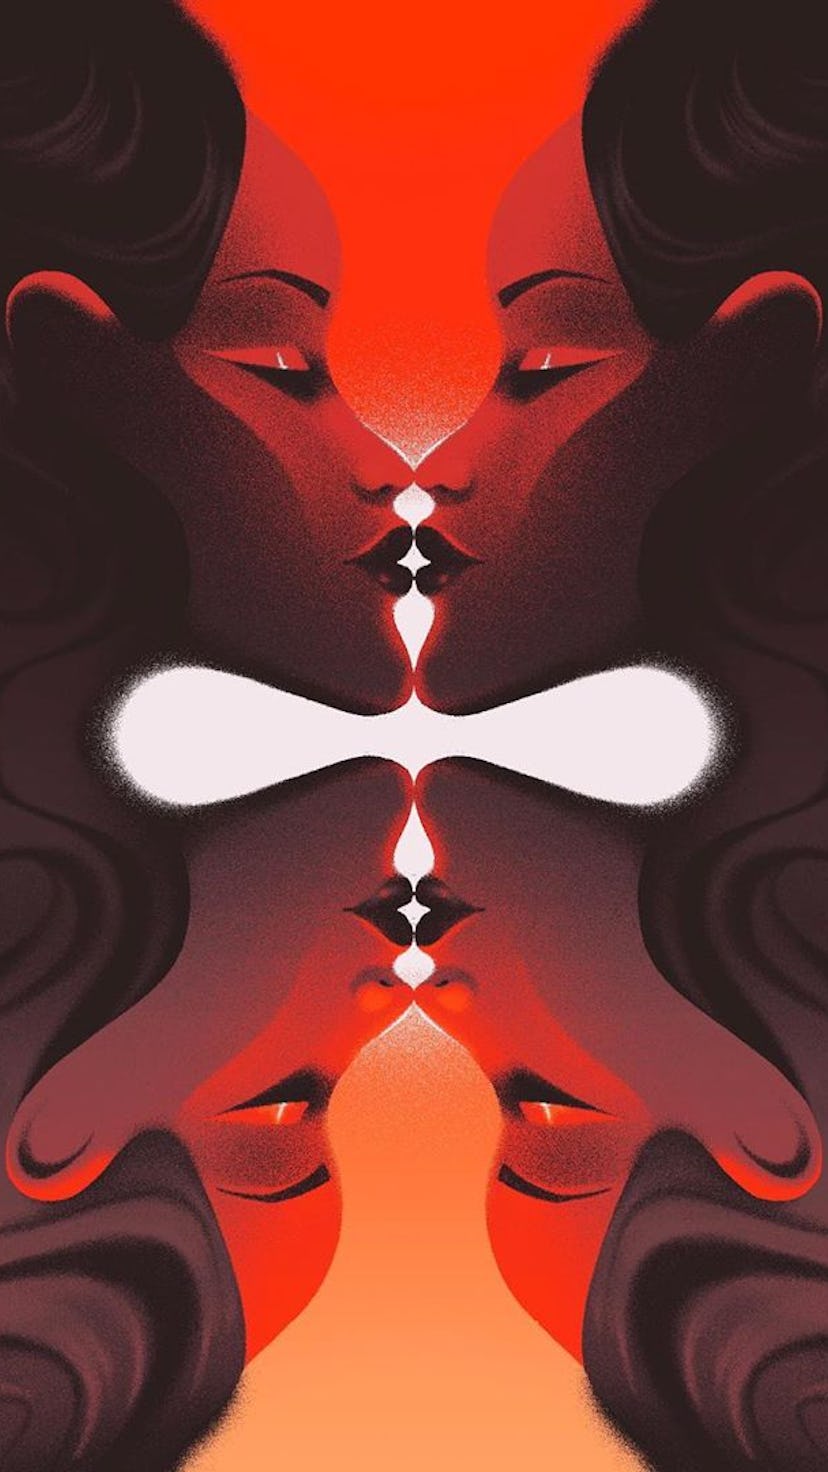 An original illustration by Simone Noronha of mirrored faces in profile.